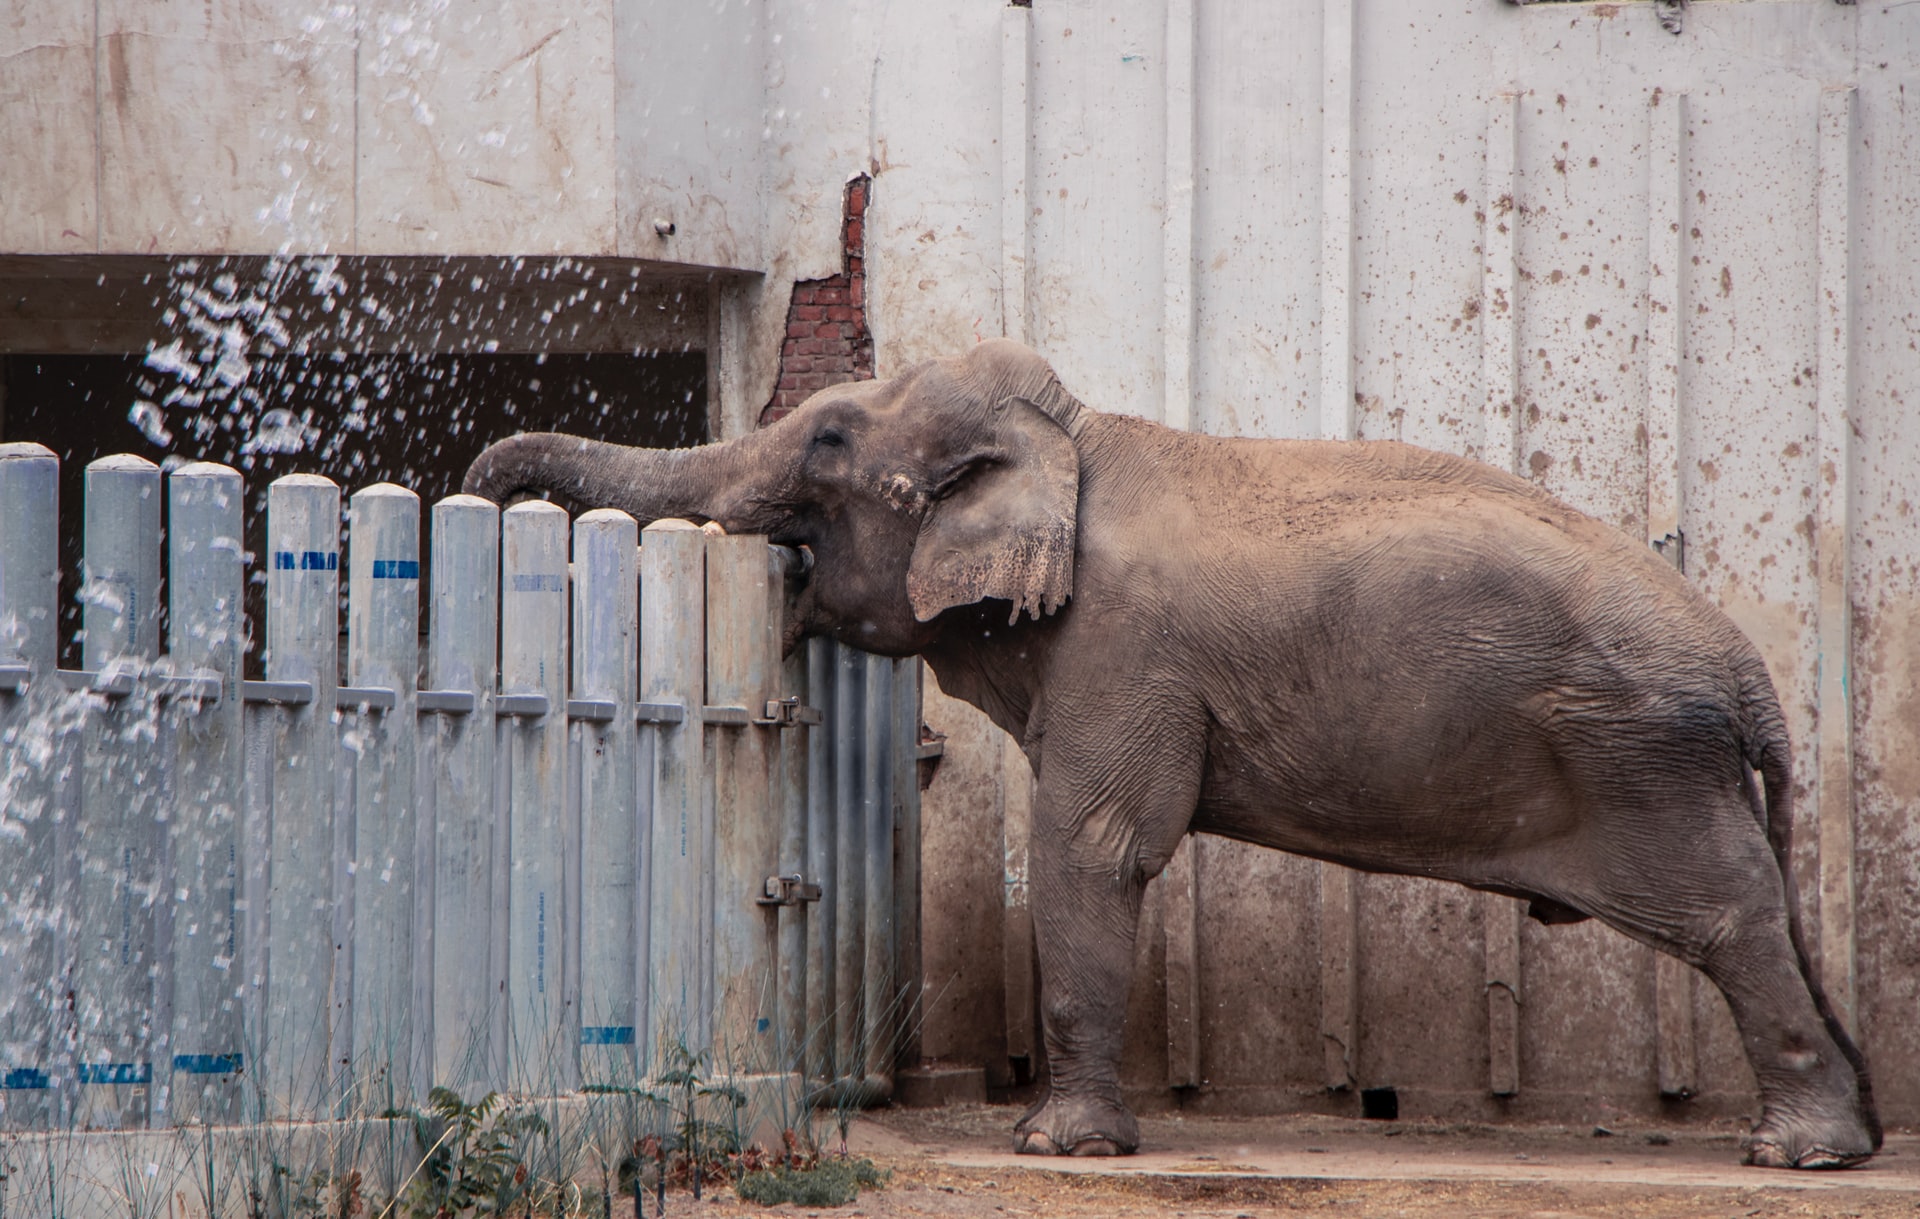 Elephant drinking from a receptacle placed behind a building fence